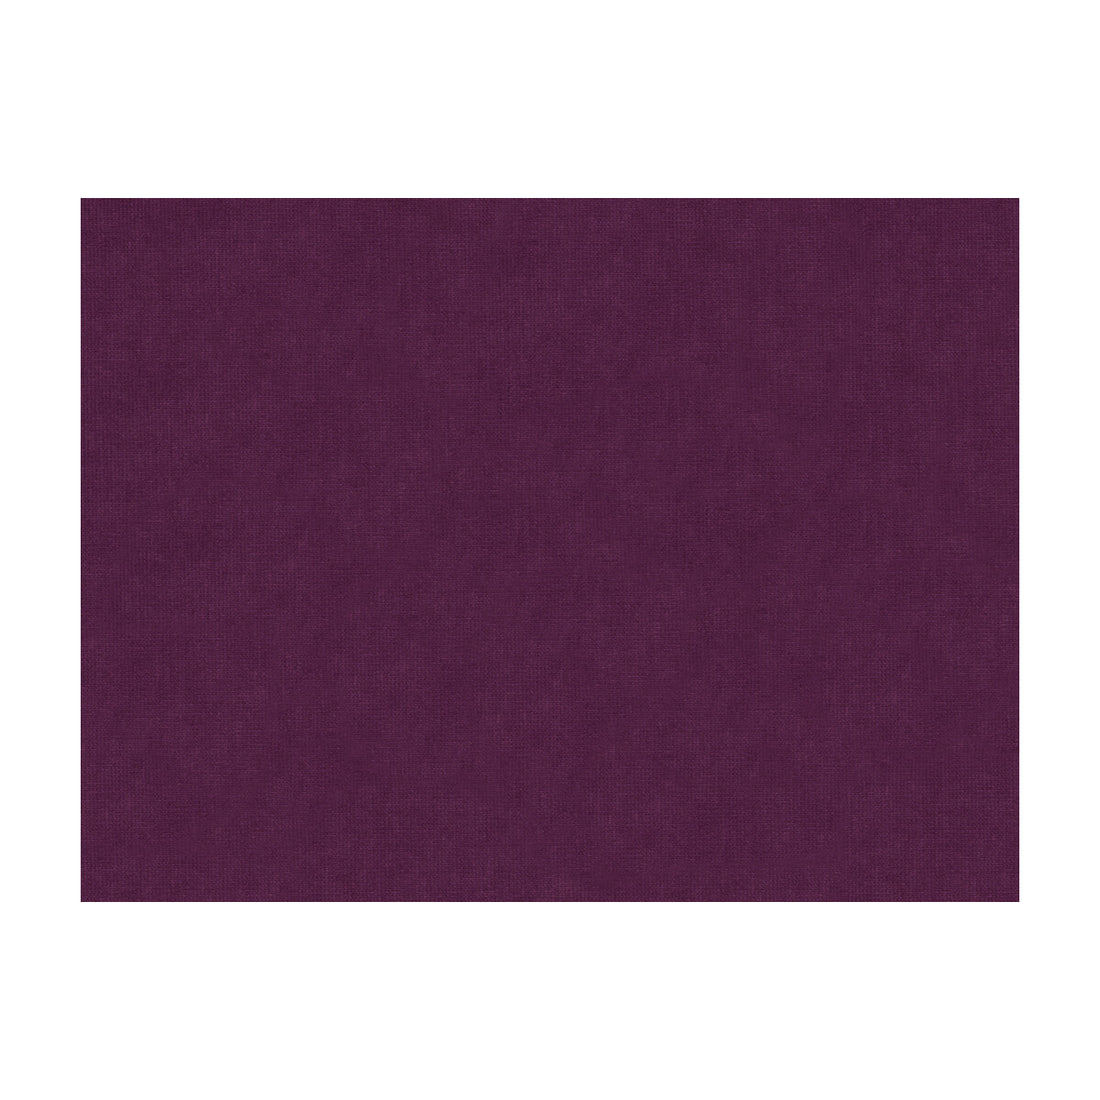 Charmant Velvet fabric in plum color - pattern 8013150.10.0 - by Brunschwig &amp; Fils